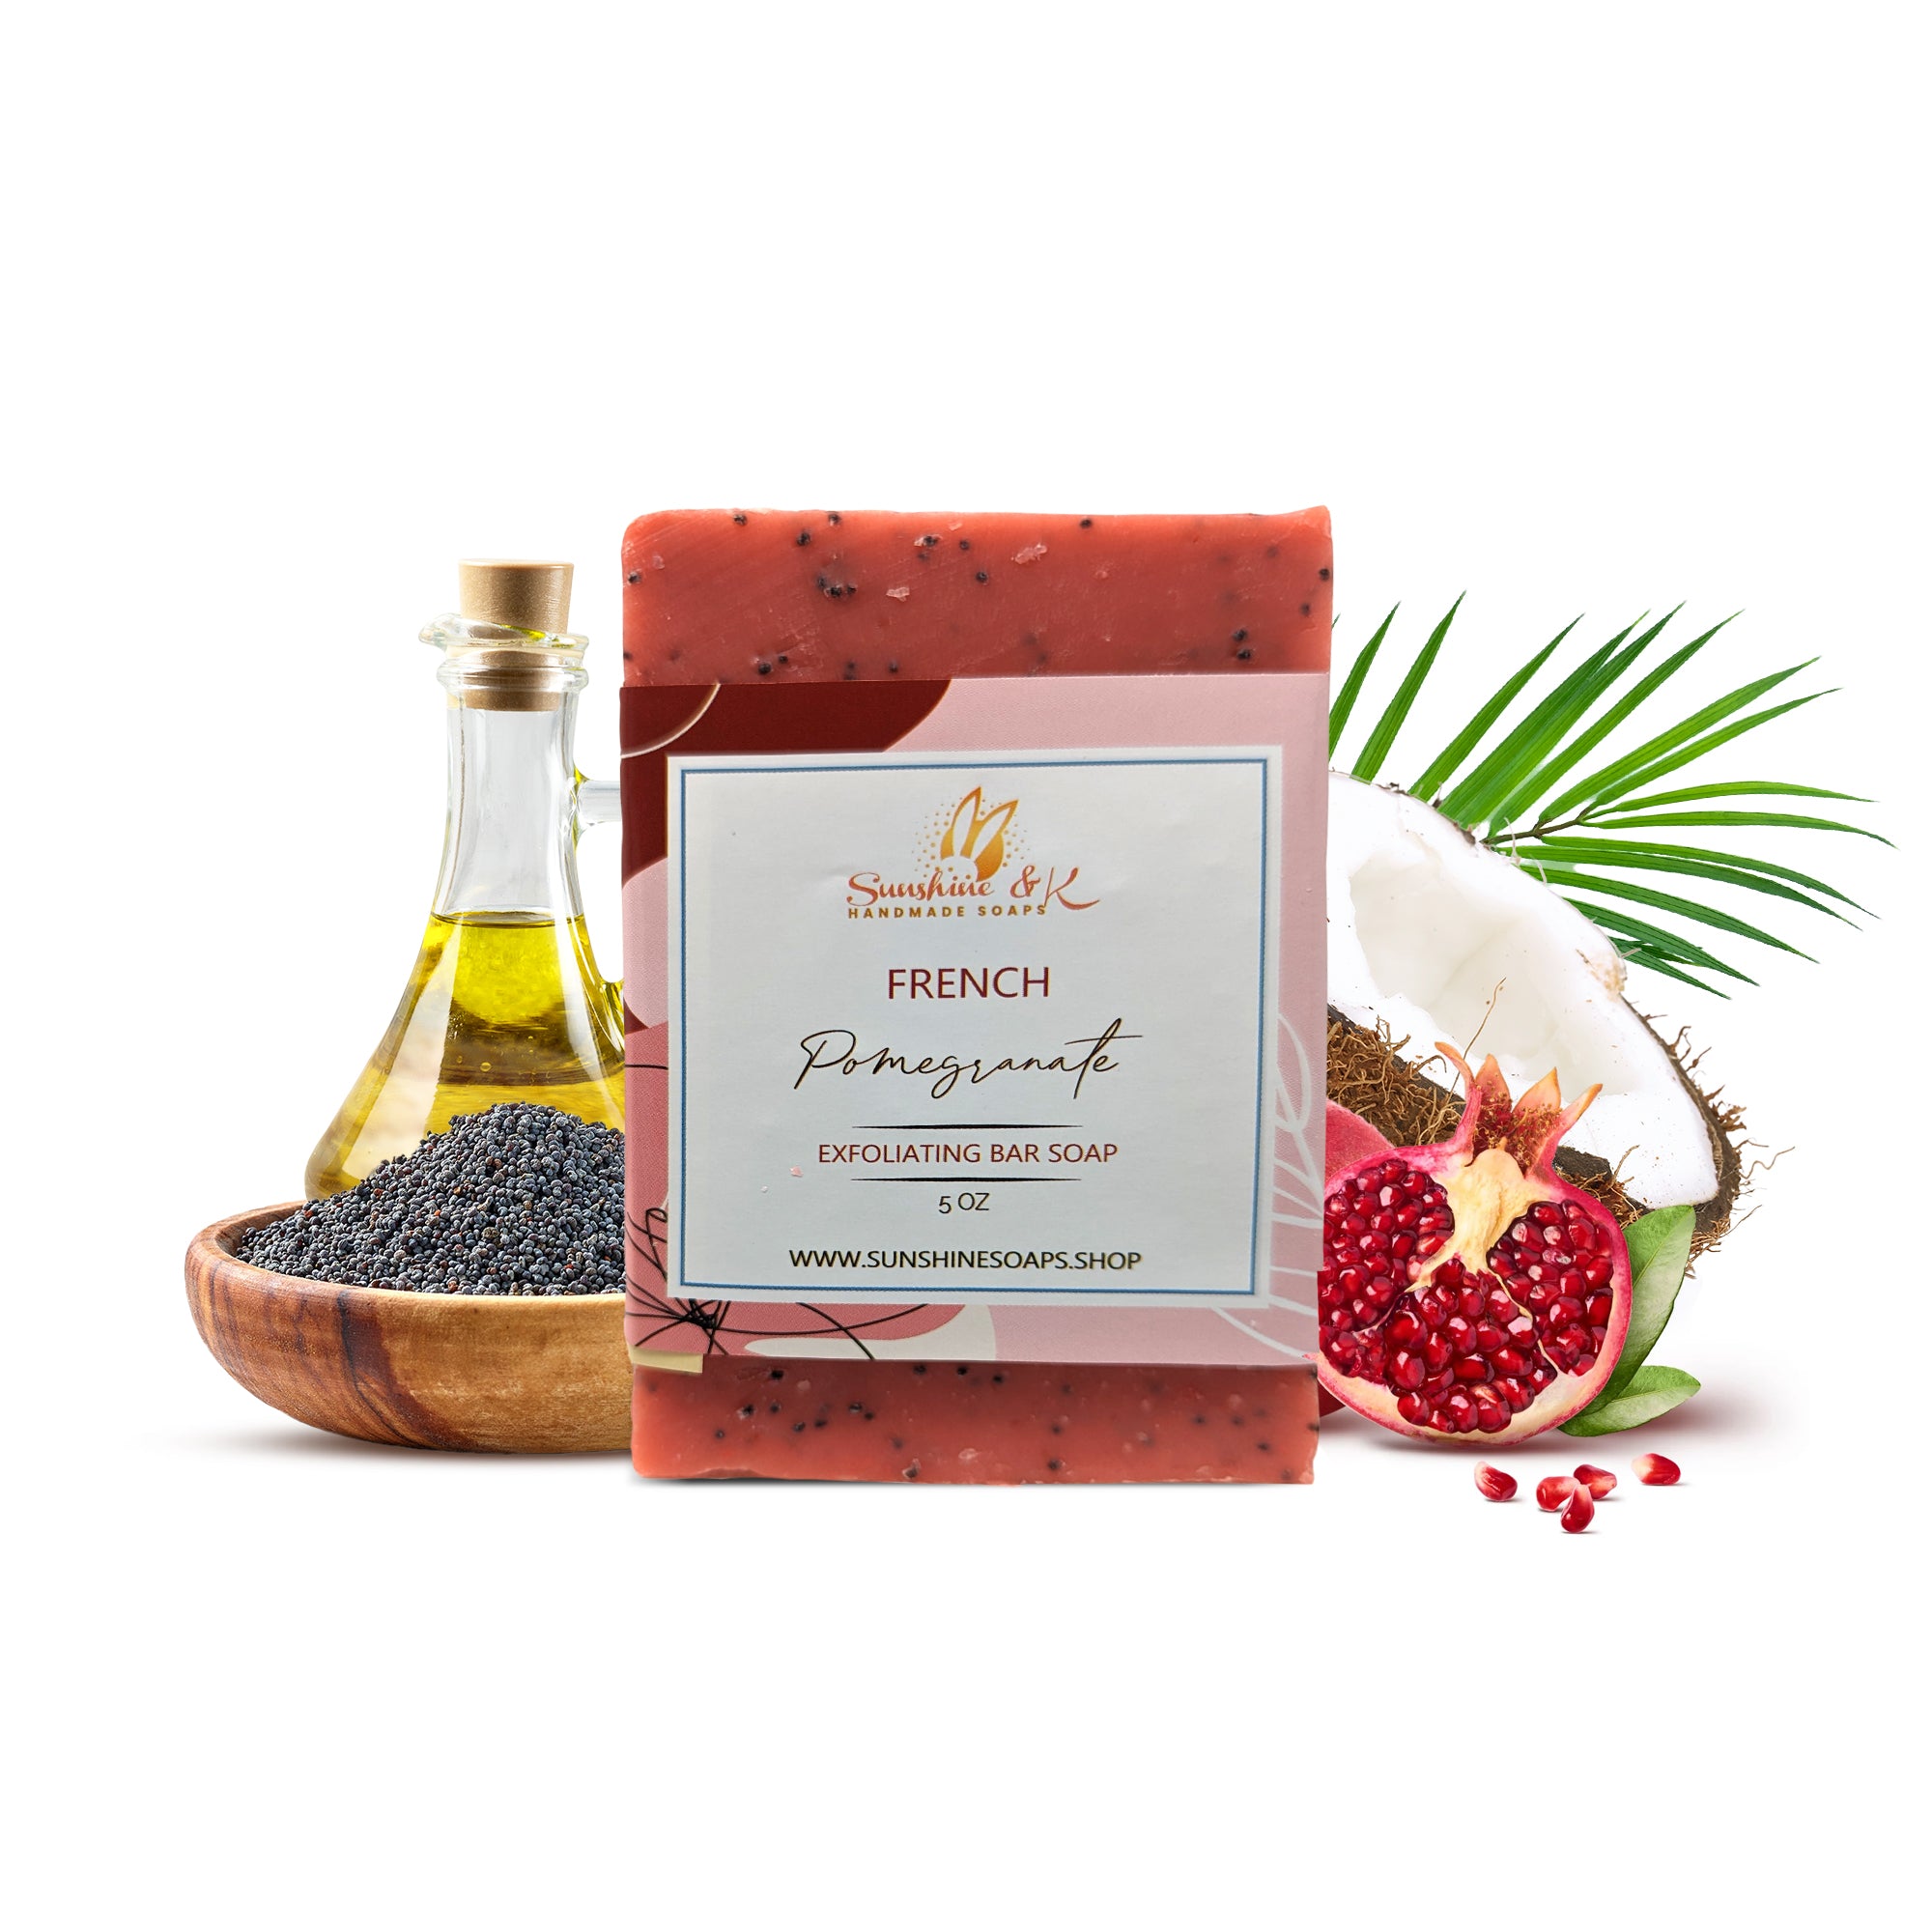 French Pomegranate Soap Bar - Exfoliating Soap, Bar Soap with Poppy Seeds & Shea Butter, Natural Base Oils Body Soap, Body Soap Bars with 6 Natural Base Oils, 5 oz - Sunshine & K Handmade Soaps - sunshine-handmade-soaps